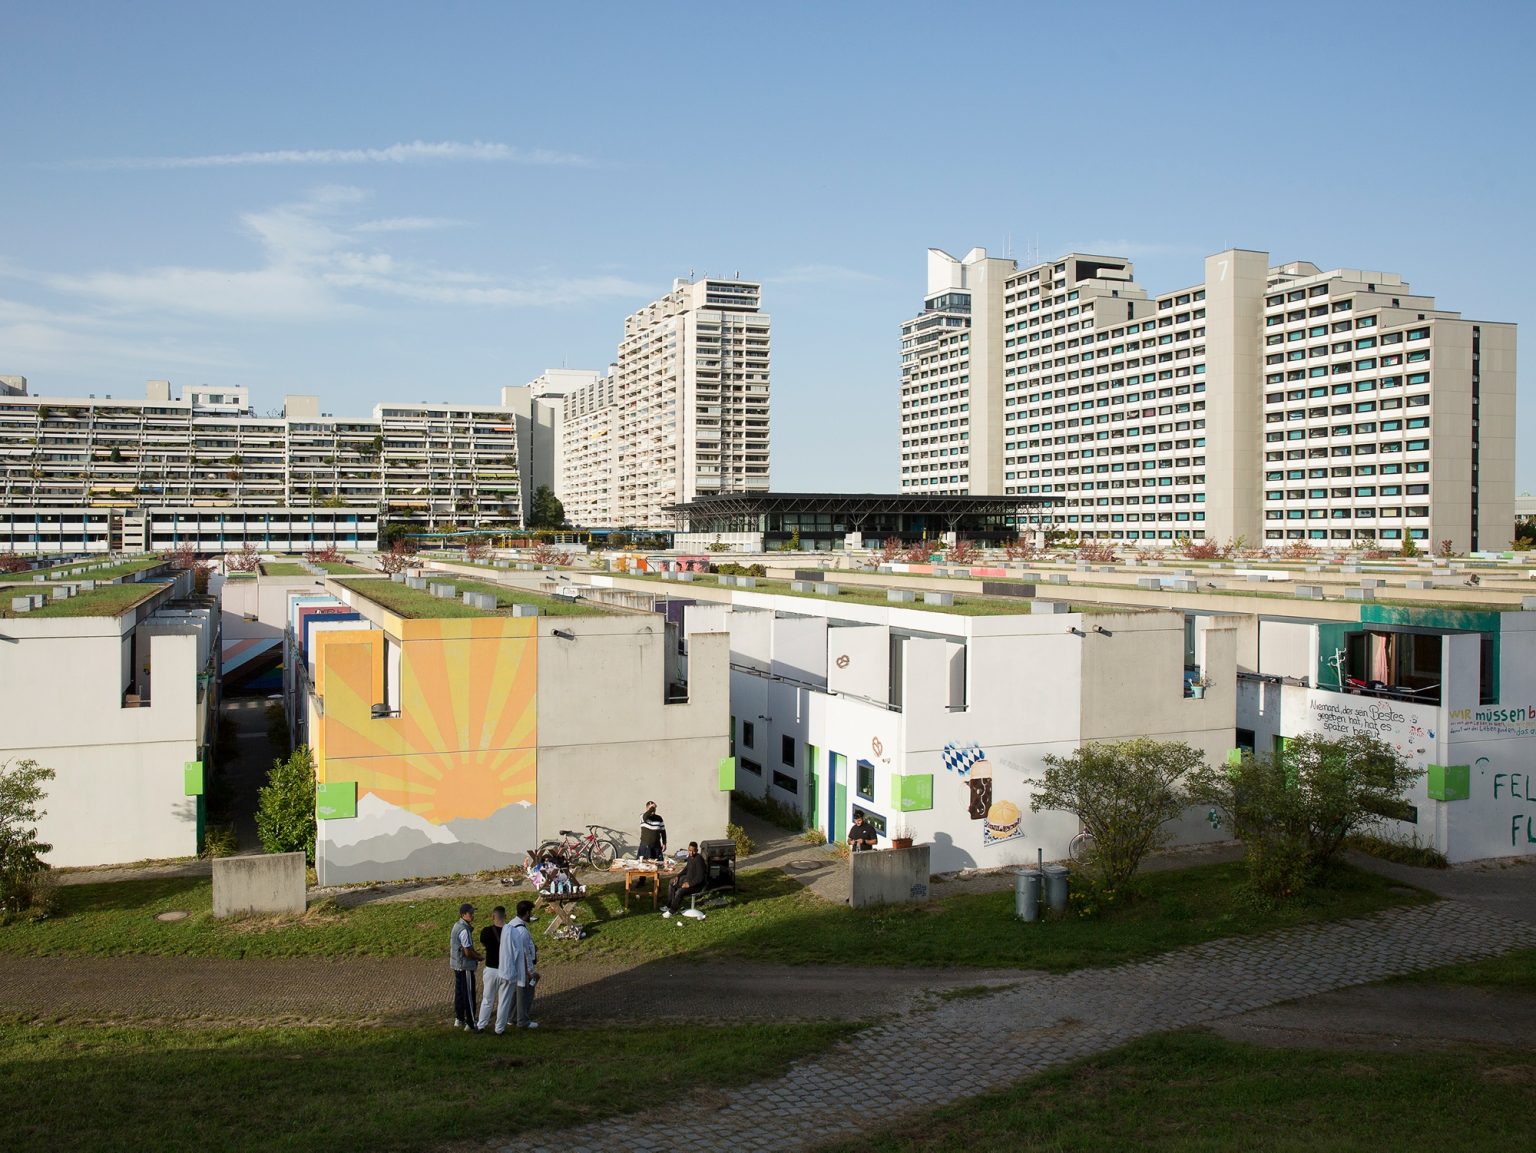 View of the student village located inside the Olympic Park in München.
München, Germany,2021